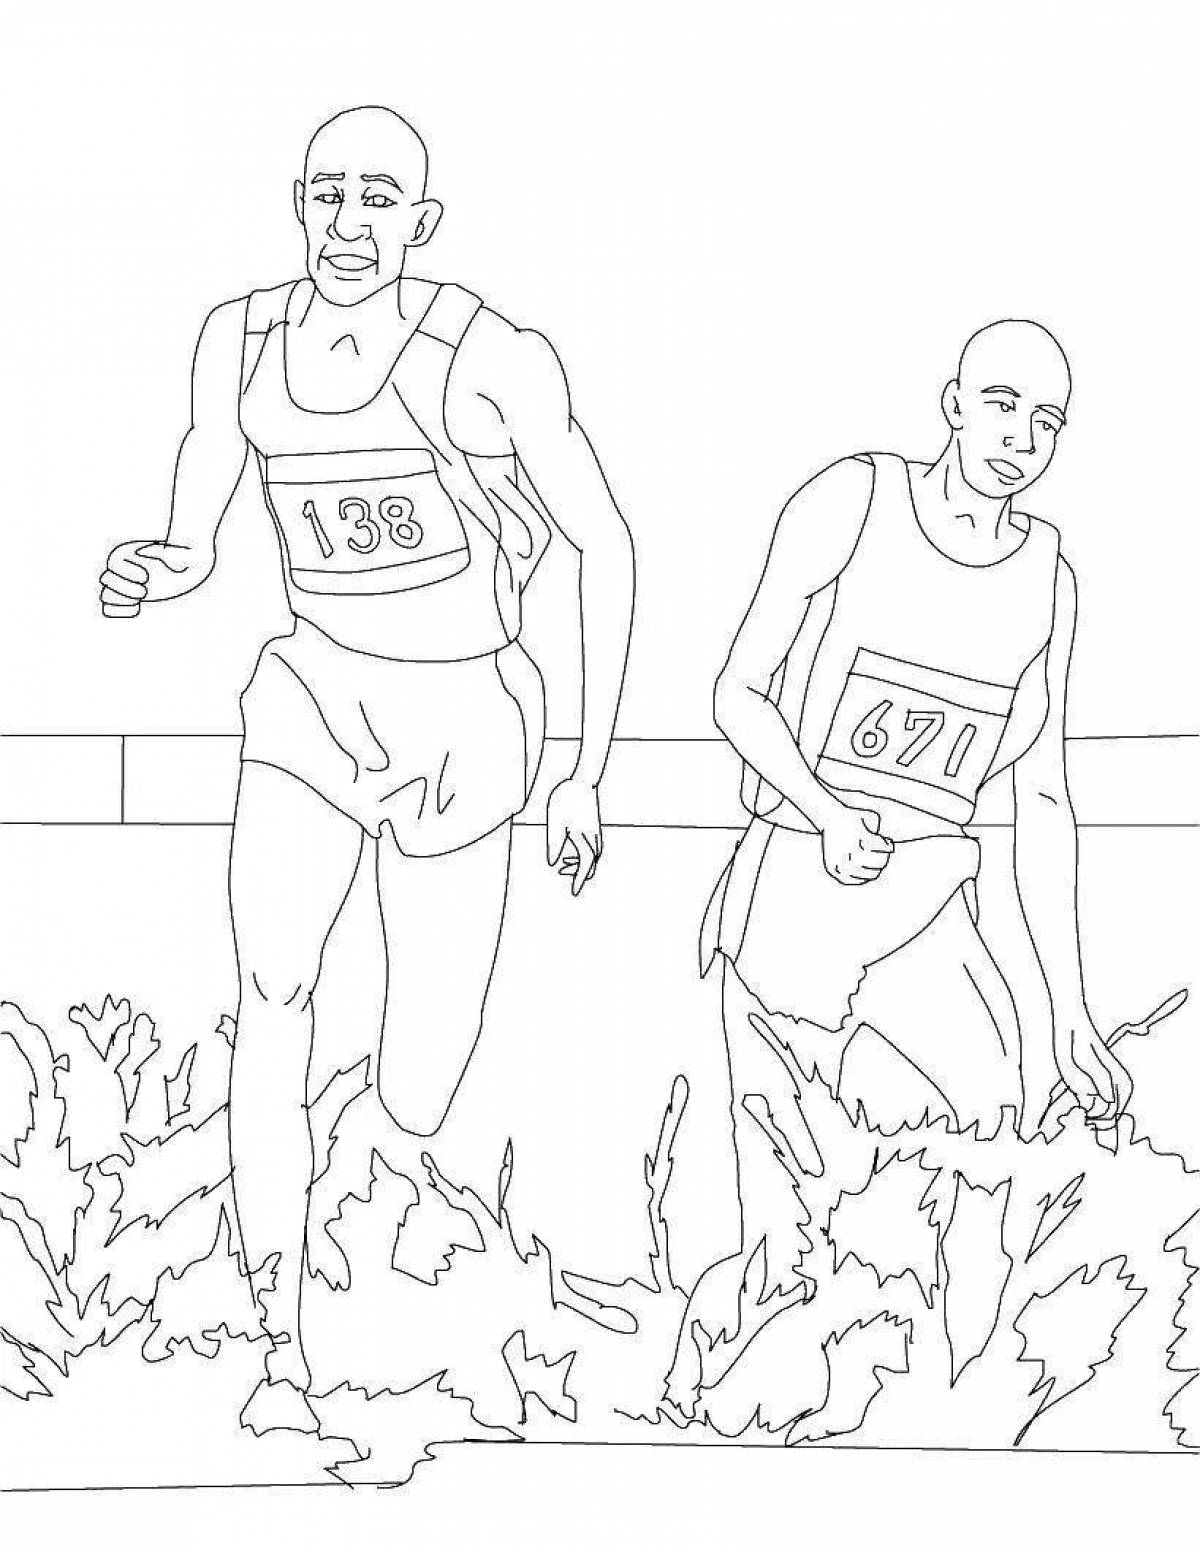 Intriguing athletics coloring book